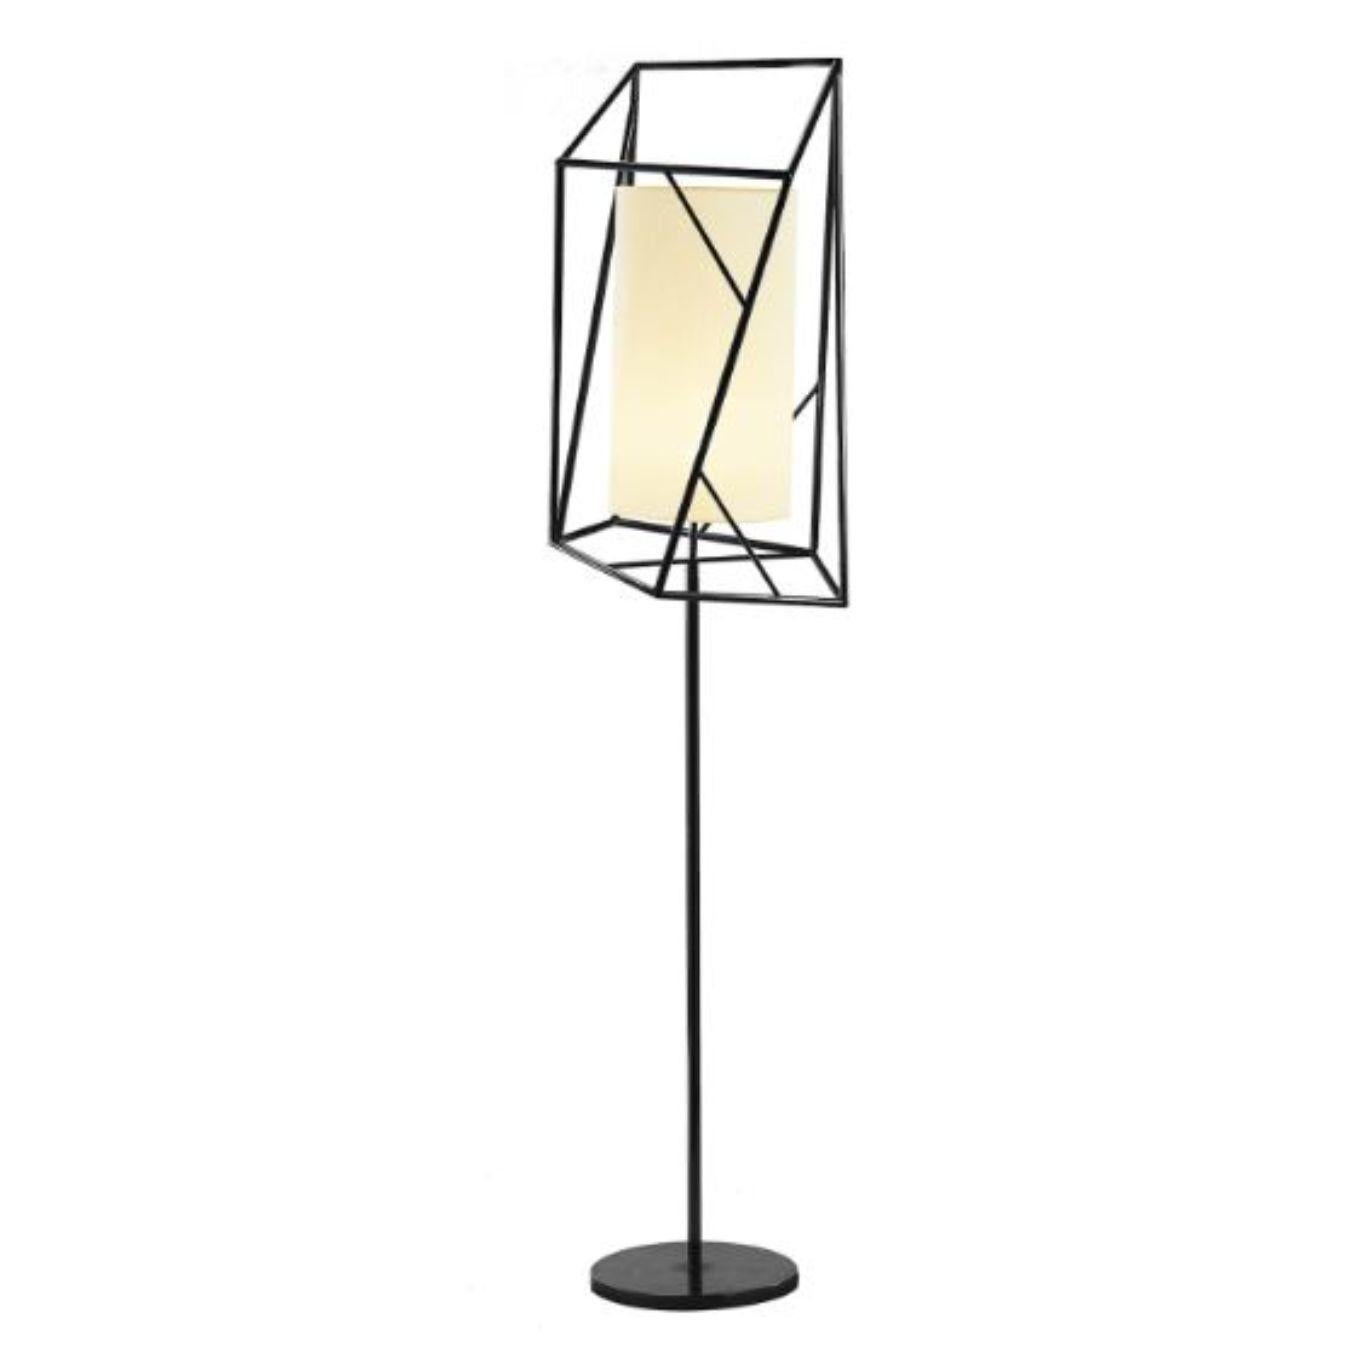 Black Star floor lamp by Dooq
Dimensions: W 45 x D 45 x H 170 cm
Materials: lacquered metal, polished or satin metal.
Abat-jour: linen
Also available in different colors and materials.

Information:
230V/50Hz
E27/1x20W